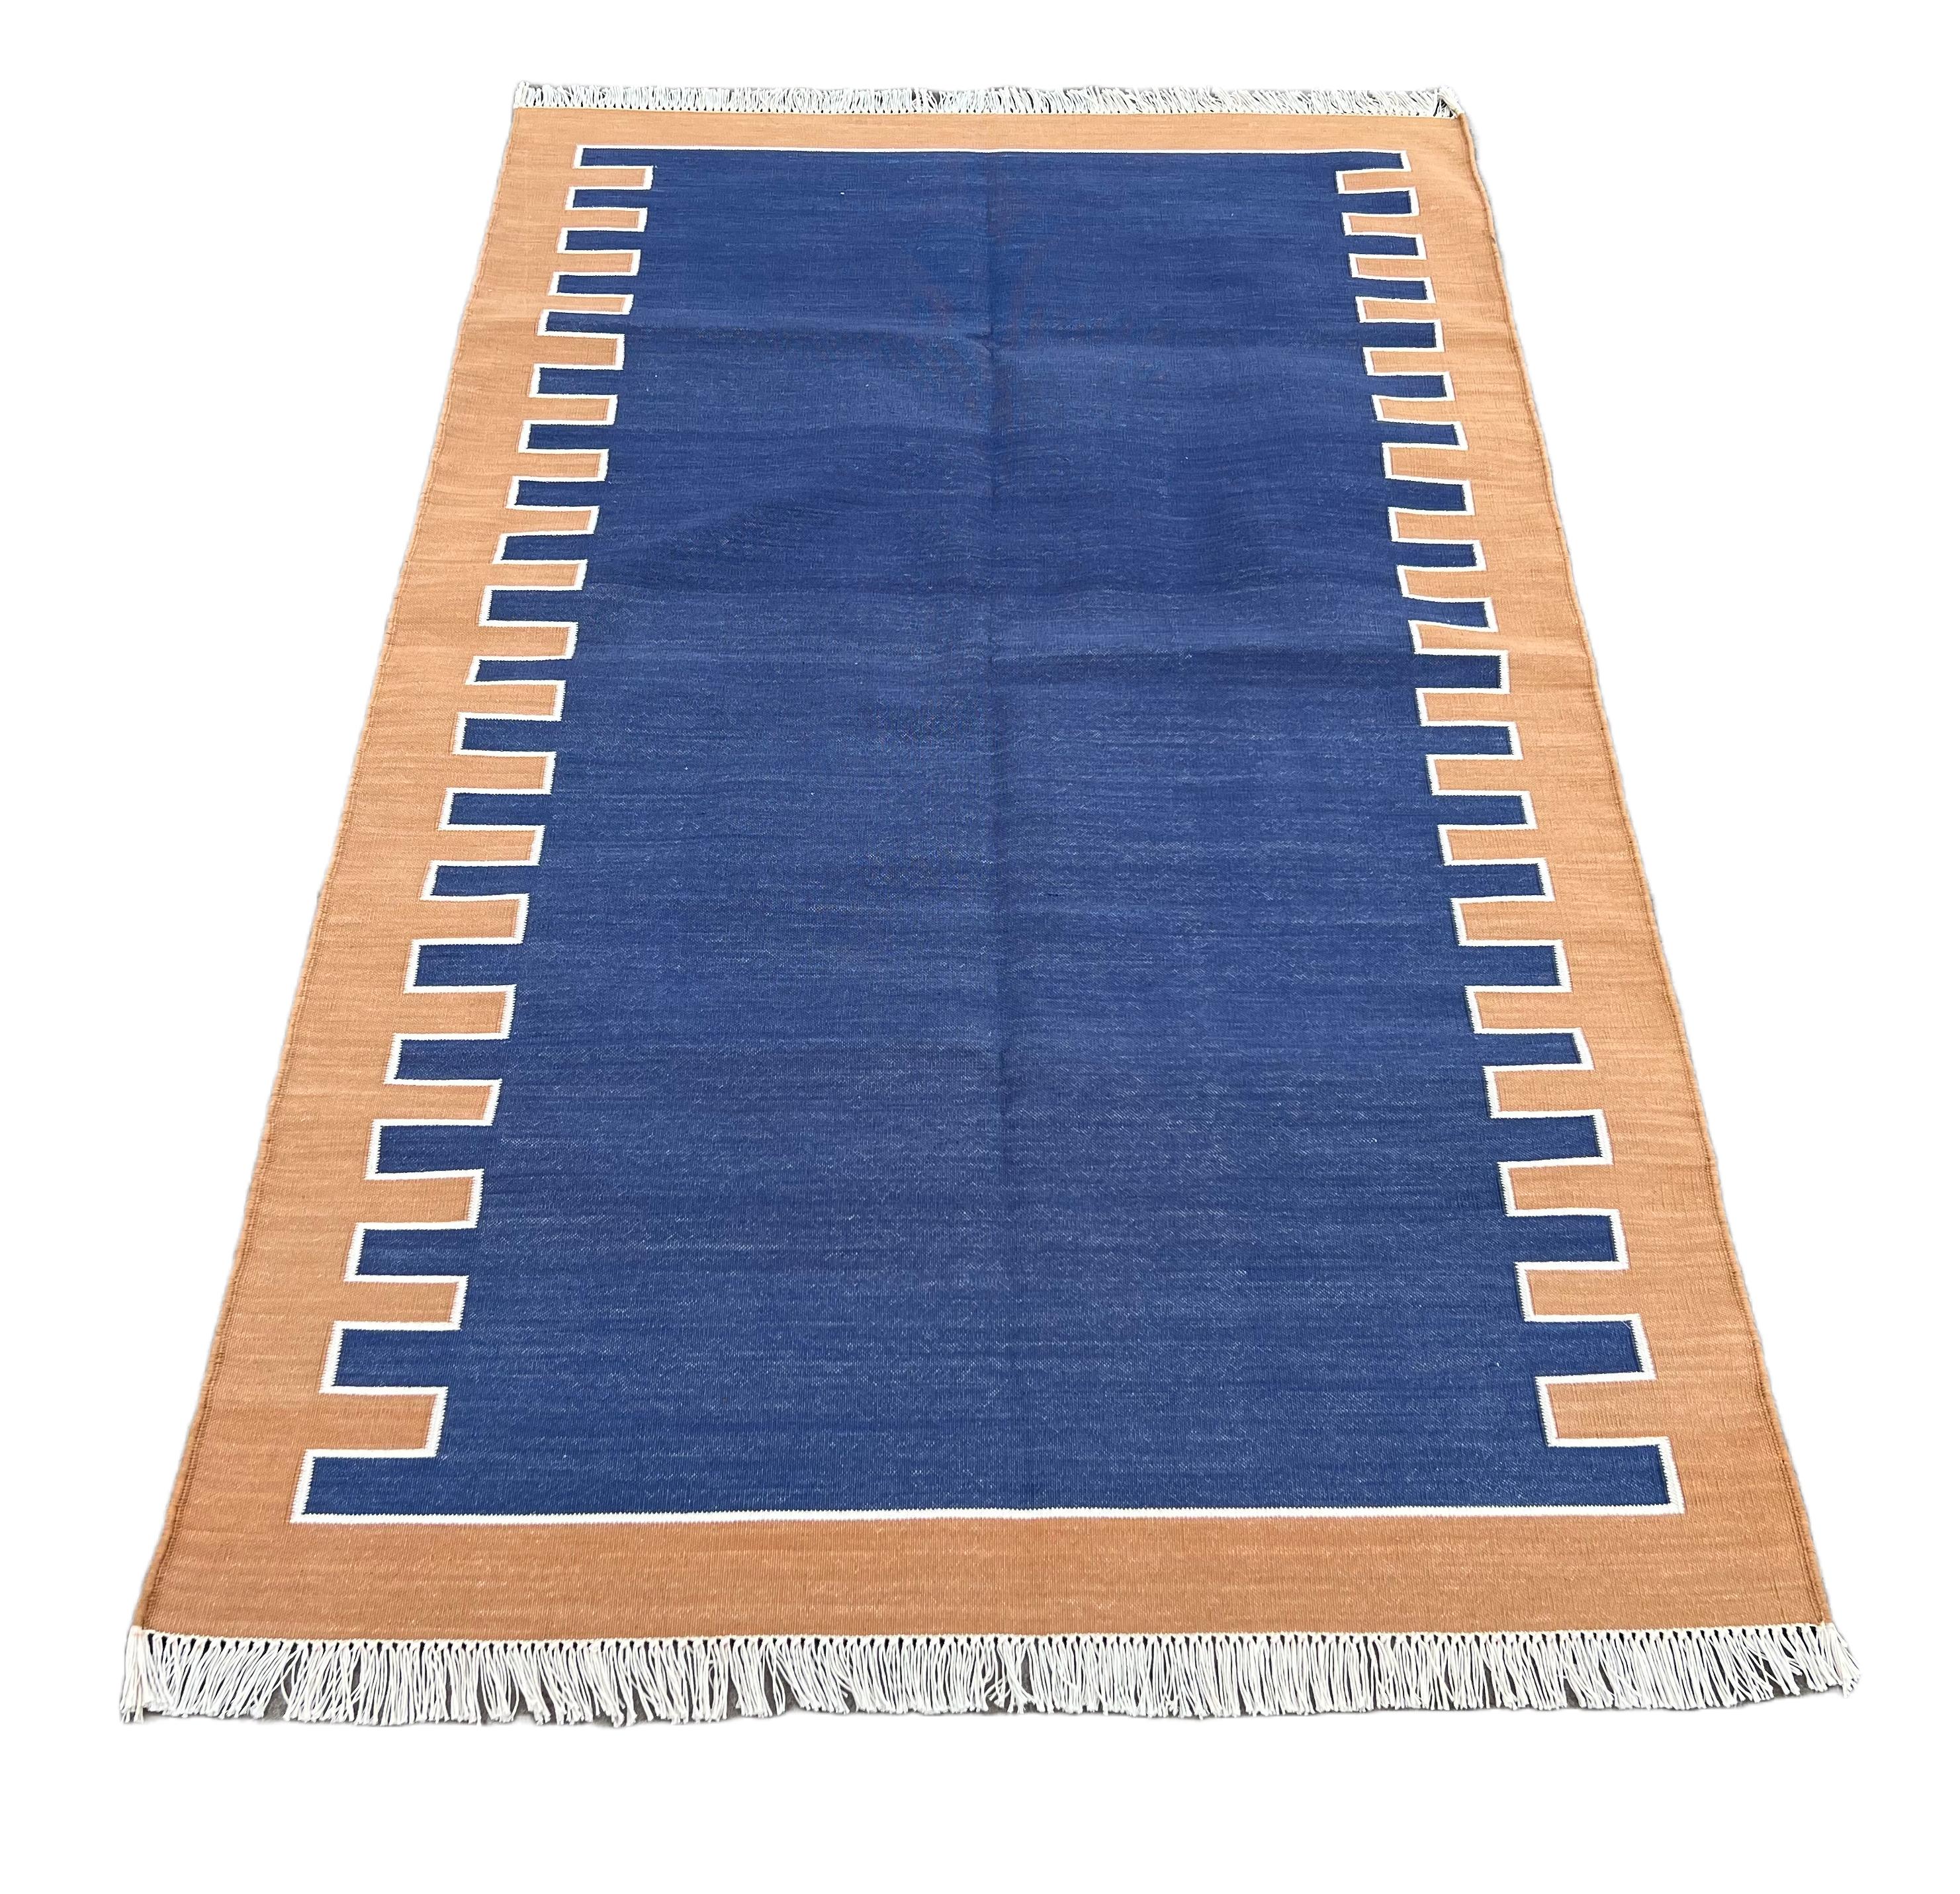 Handmade Cotton Area Flat Weave Rug, 3x5 Blue And Tan Zig Zag Striped Dhurrie In New Condition For Sale In Jaipur, IN